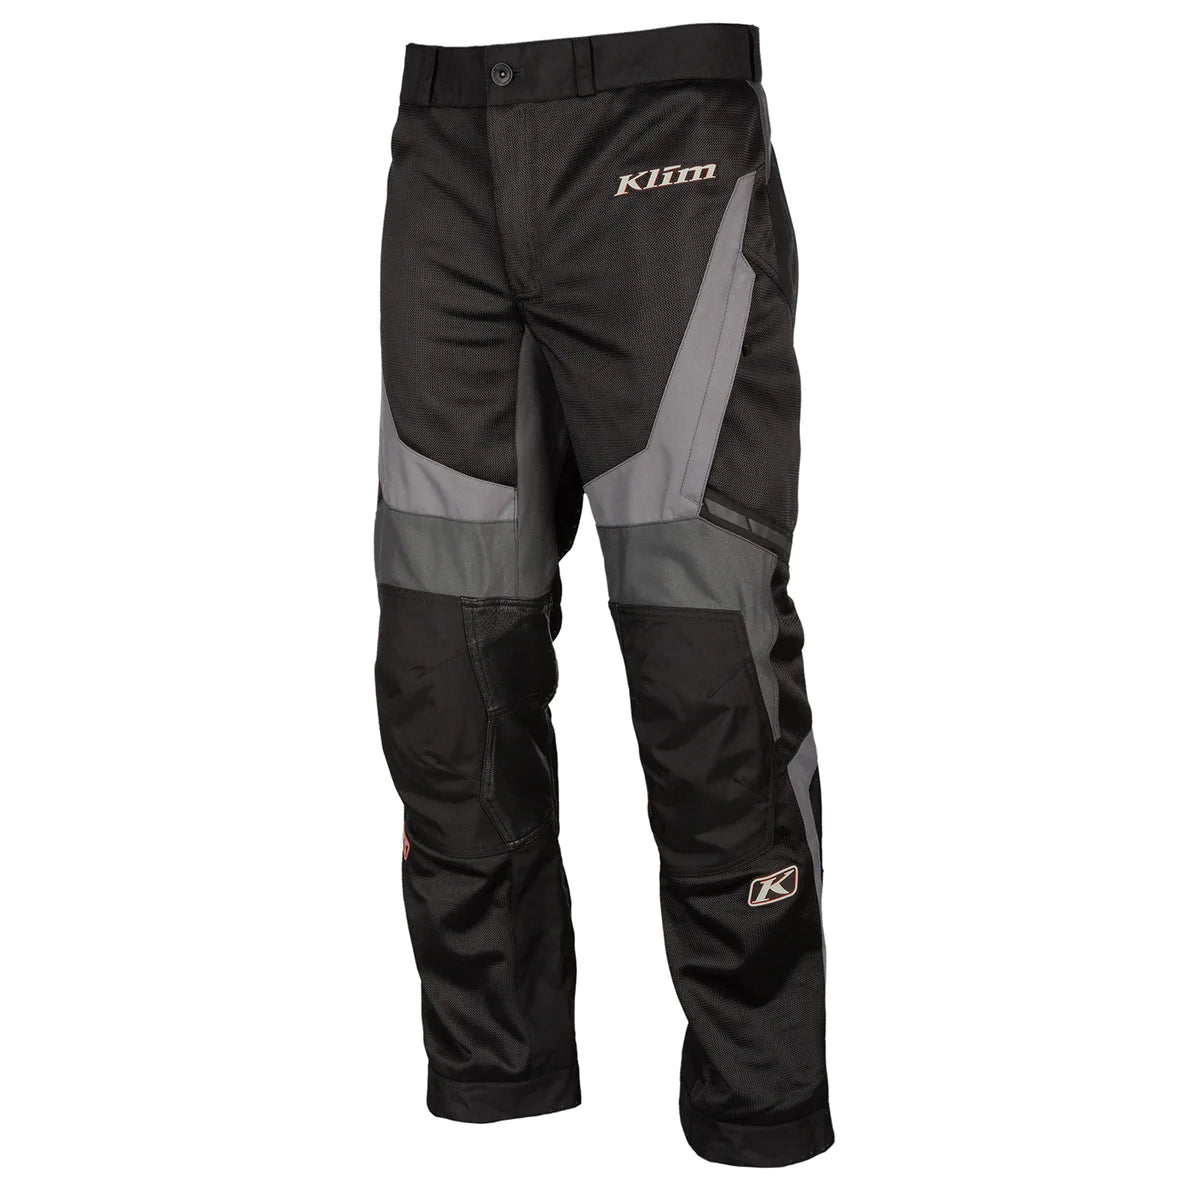 Klim Induction Stealth Black Pant for motorcycle riding